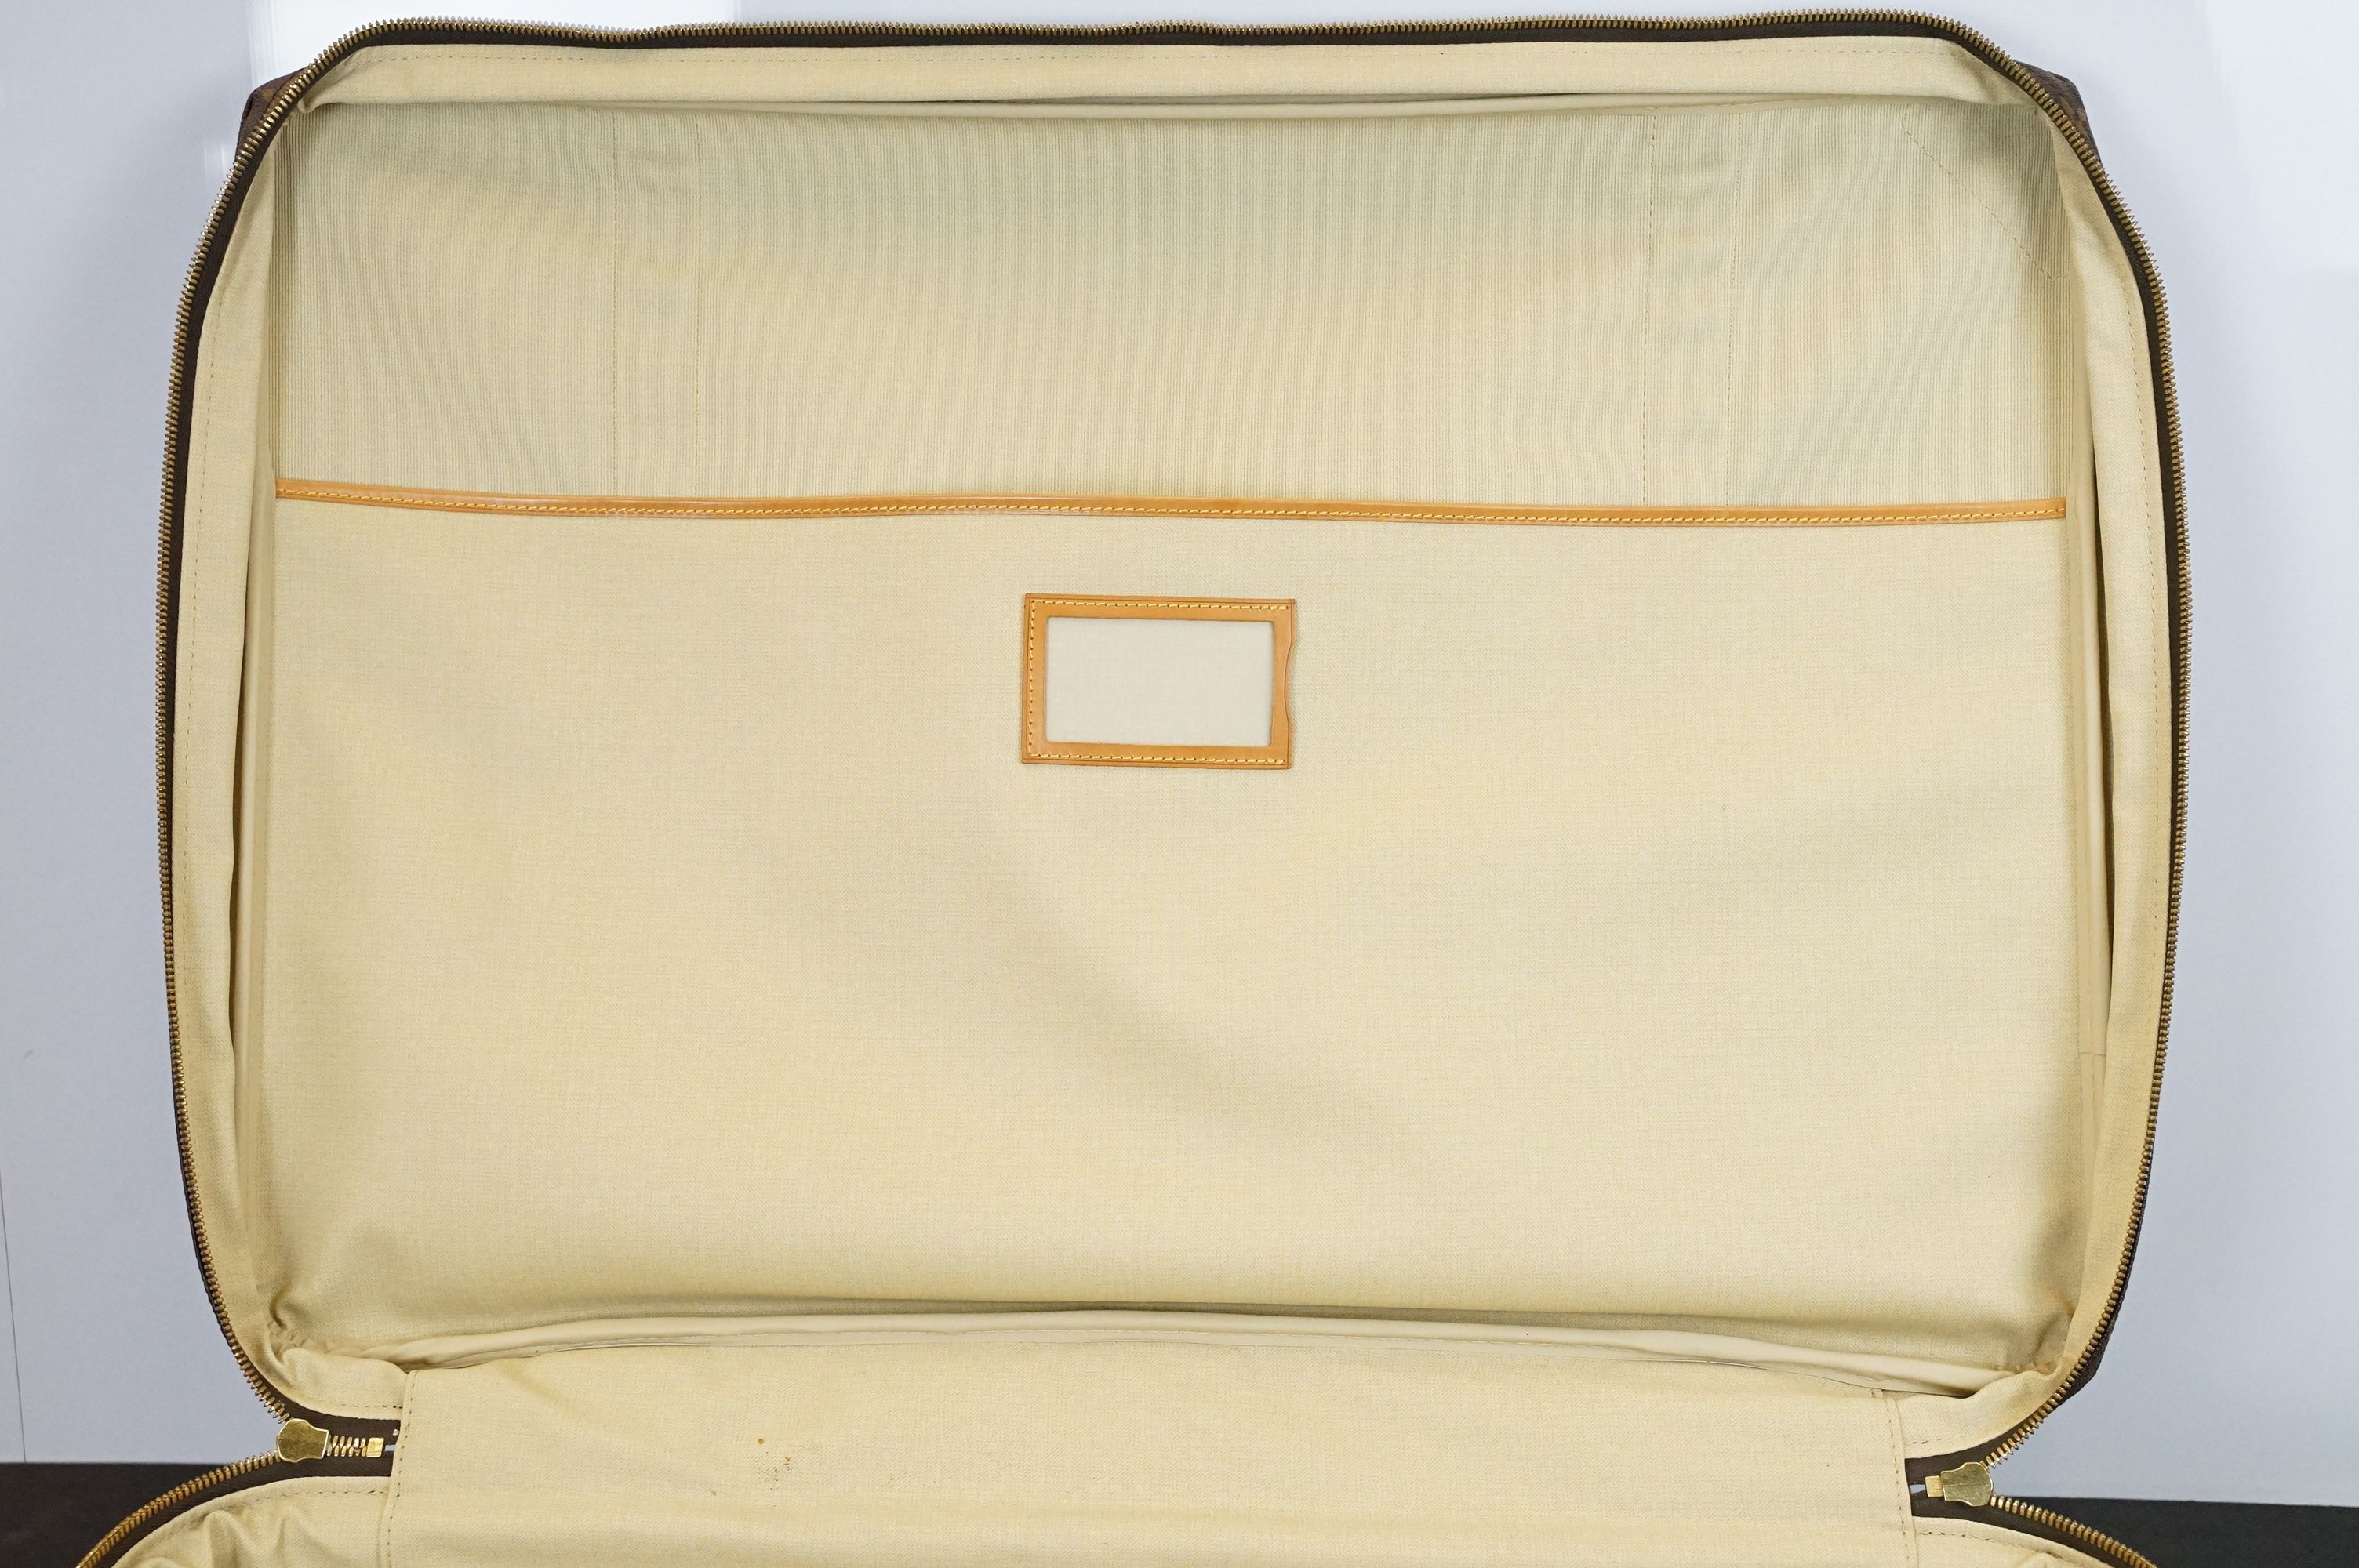 Louis Vuitton - Satellite suitcase having a monogrammed body with two canvas straps and brown - Image 16 of 18